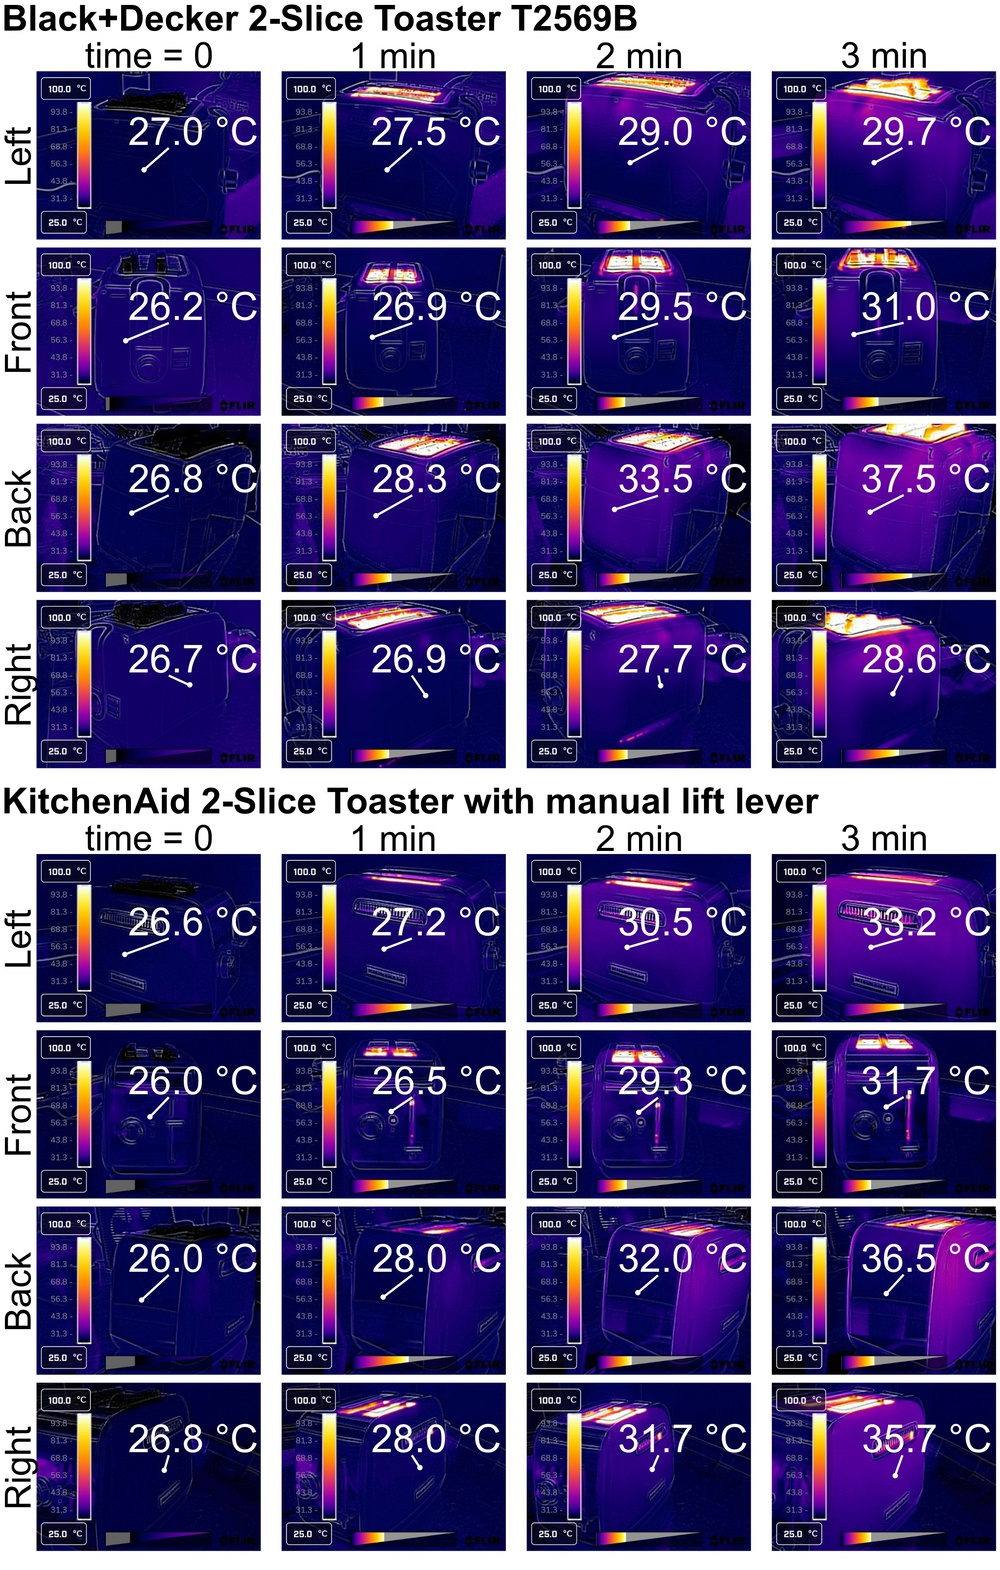 Infrared camera images of the Black+Decker and KitchenAid toasters taken while running their golden-brown toasting cycles. Heat is transferred more readily from the body of the KitchenAid, especially at the sides of the toaster, compared to the Black+Decker.